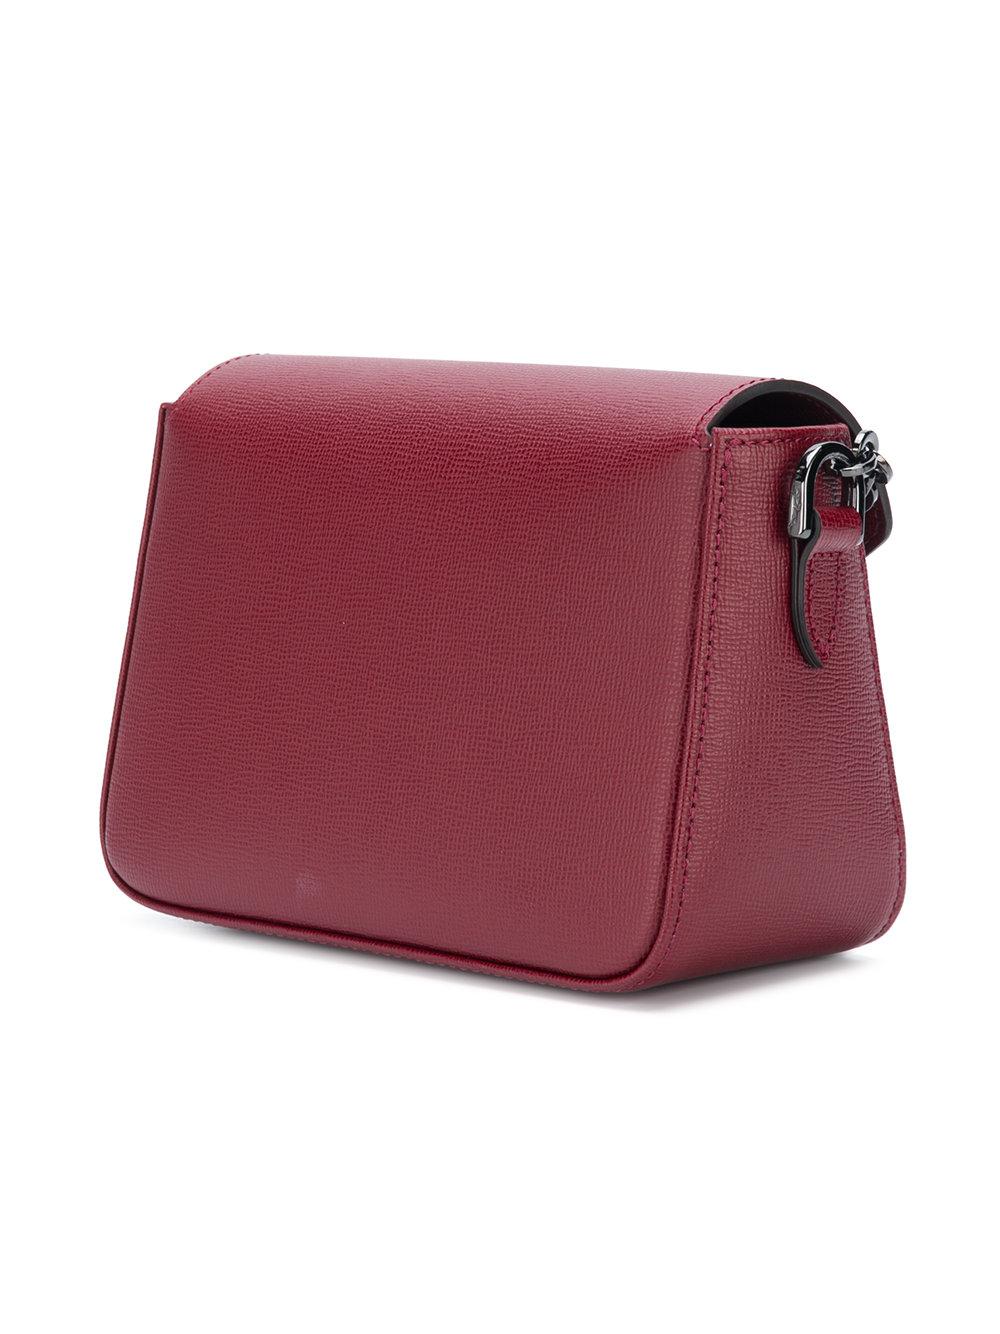 Longchamp Leather Le Pliage Héritage Cross Body Bag in Red - Lyst